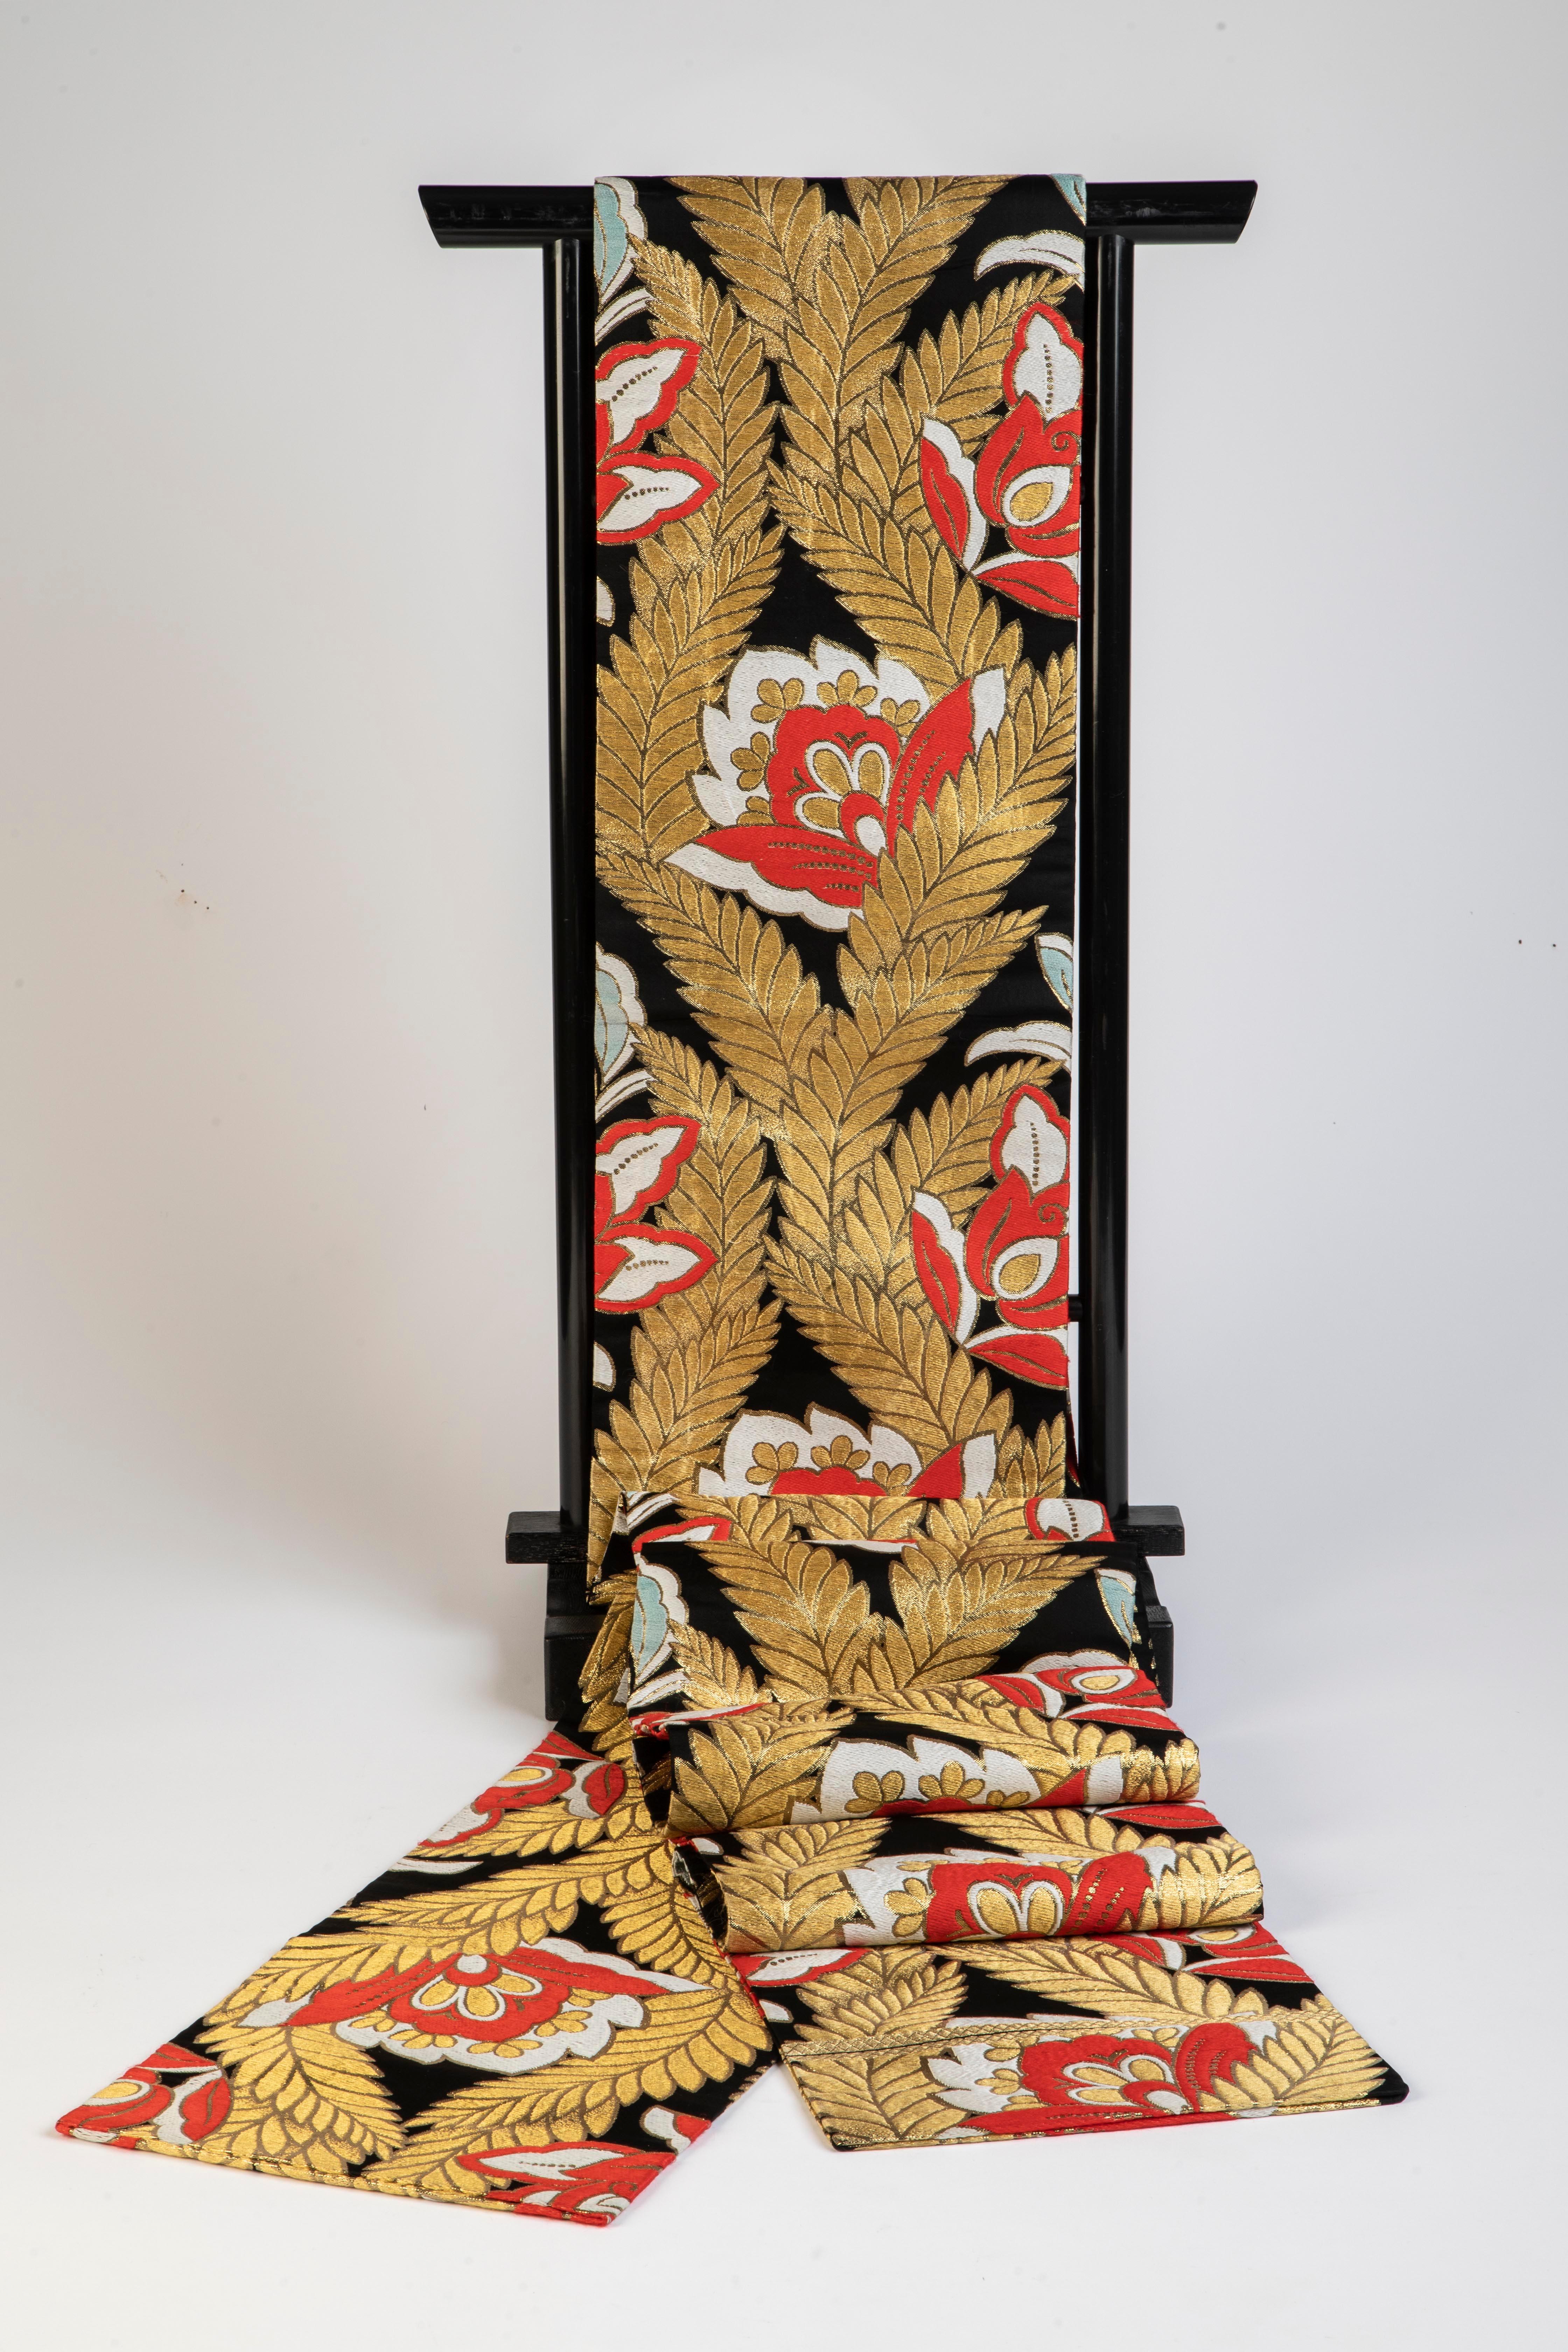 Festive red/black/gold/aqua silk Japanese Obi for the Holidays or anytime.
Great as accent table runner or hanging wall art.
Good condition.
1940/50
Finished on both sides.
Measurements (of textile item):
 154